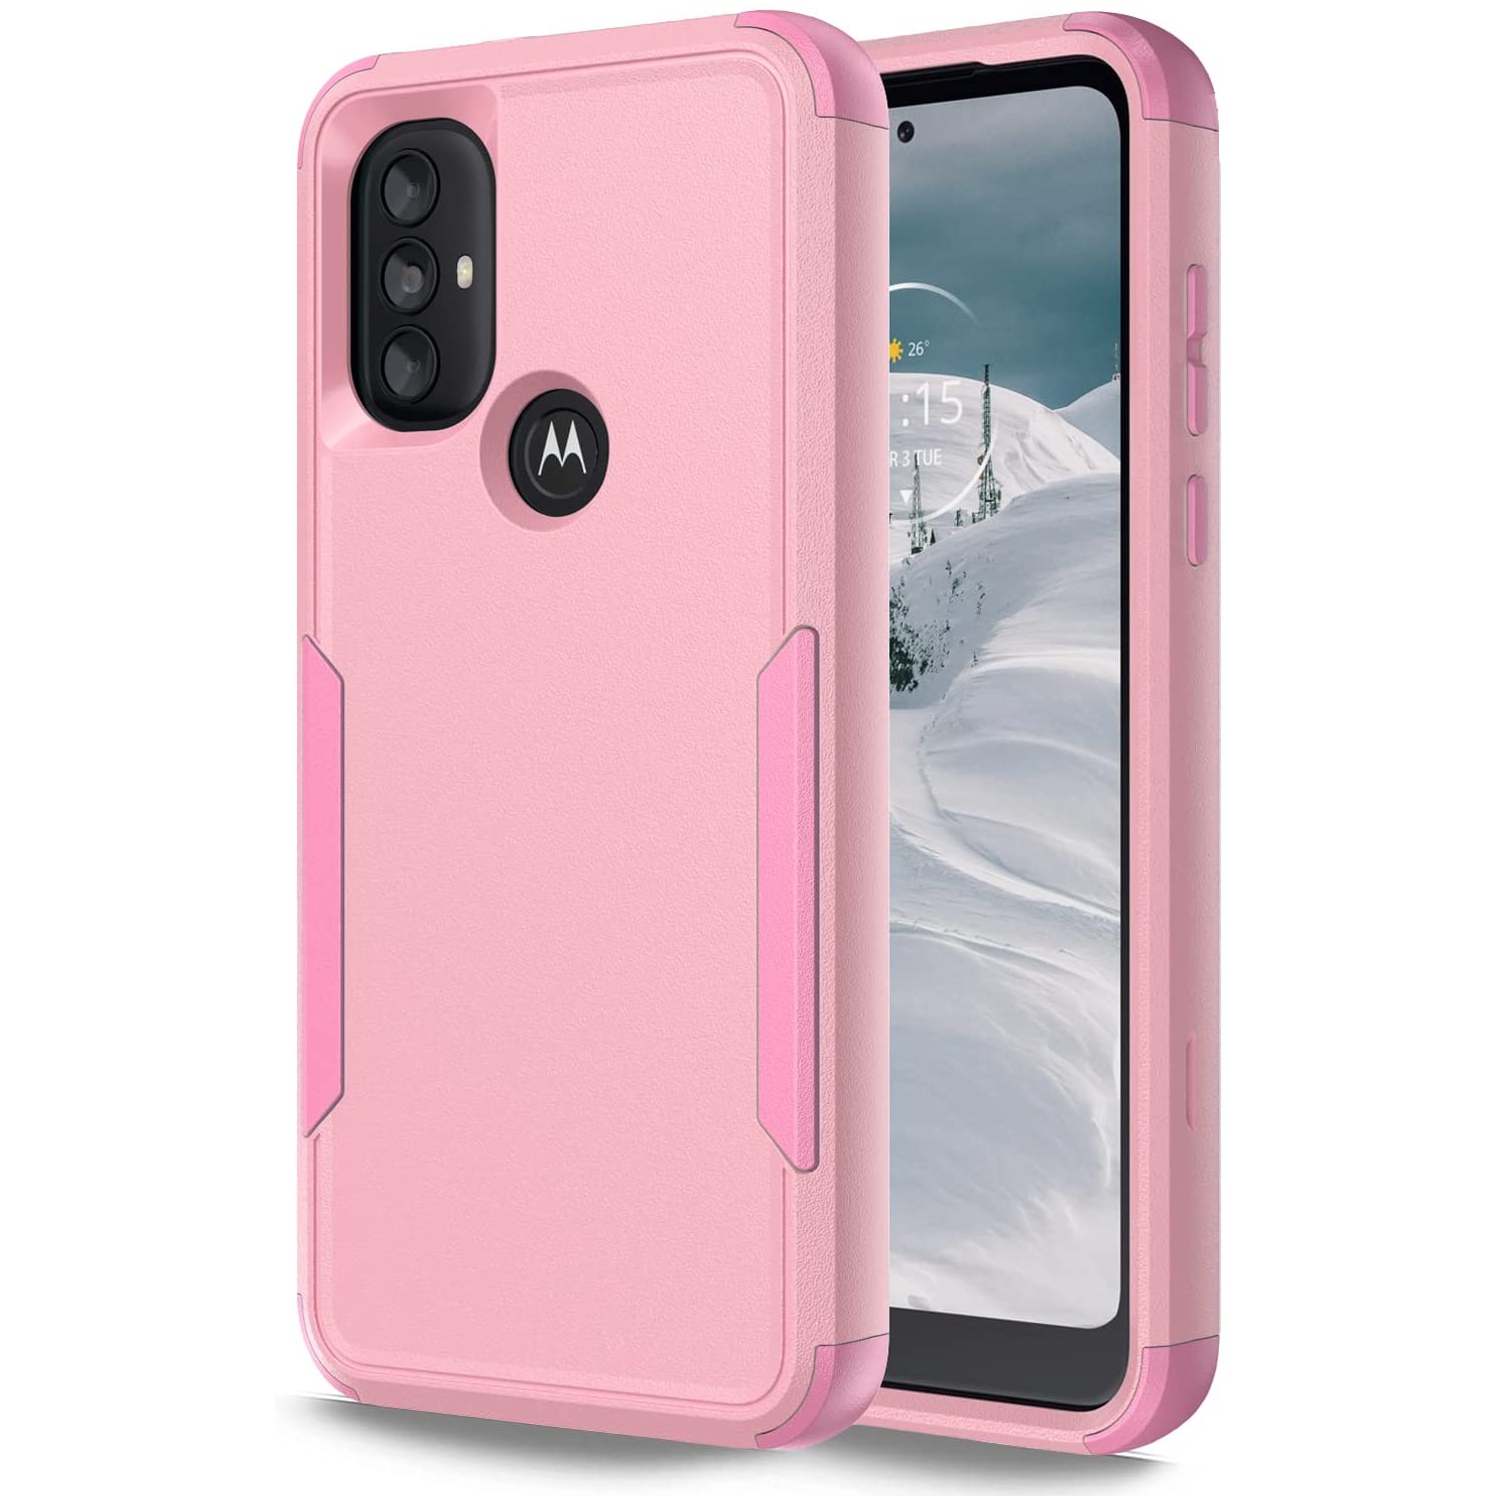 【CSmart】 Dual Layers Heavy Duty Rubber Armor Bumper Hard Case Cover for Motorola Moto G Power 2022 / G Play 2023, Pink